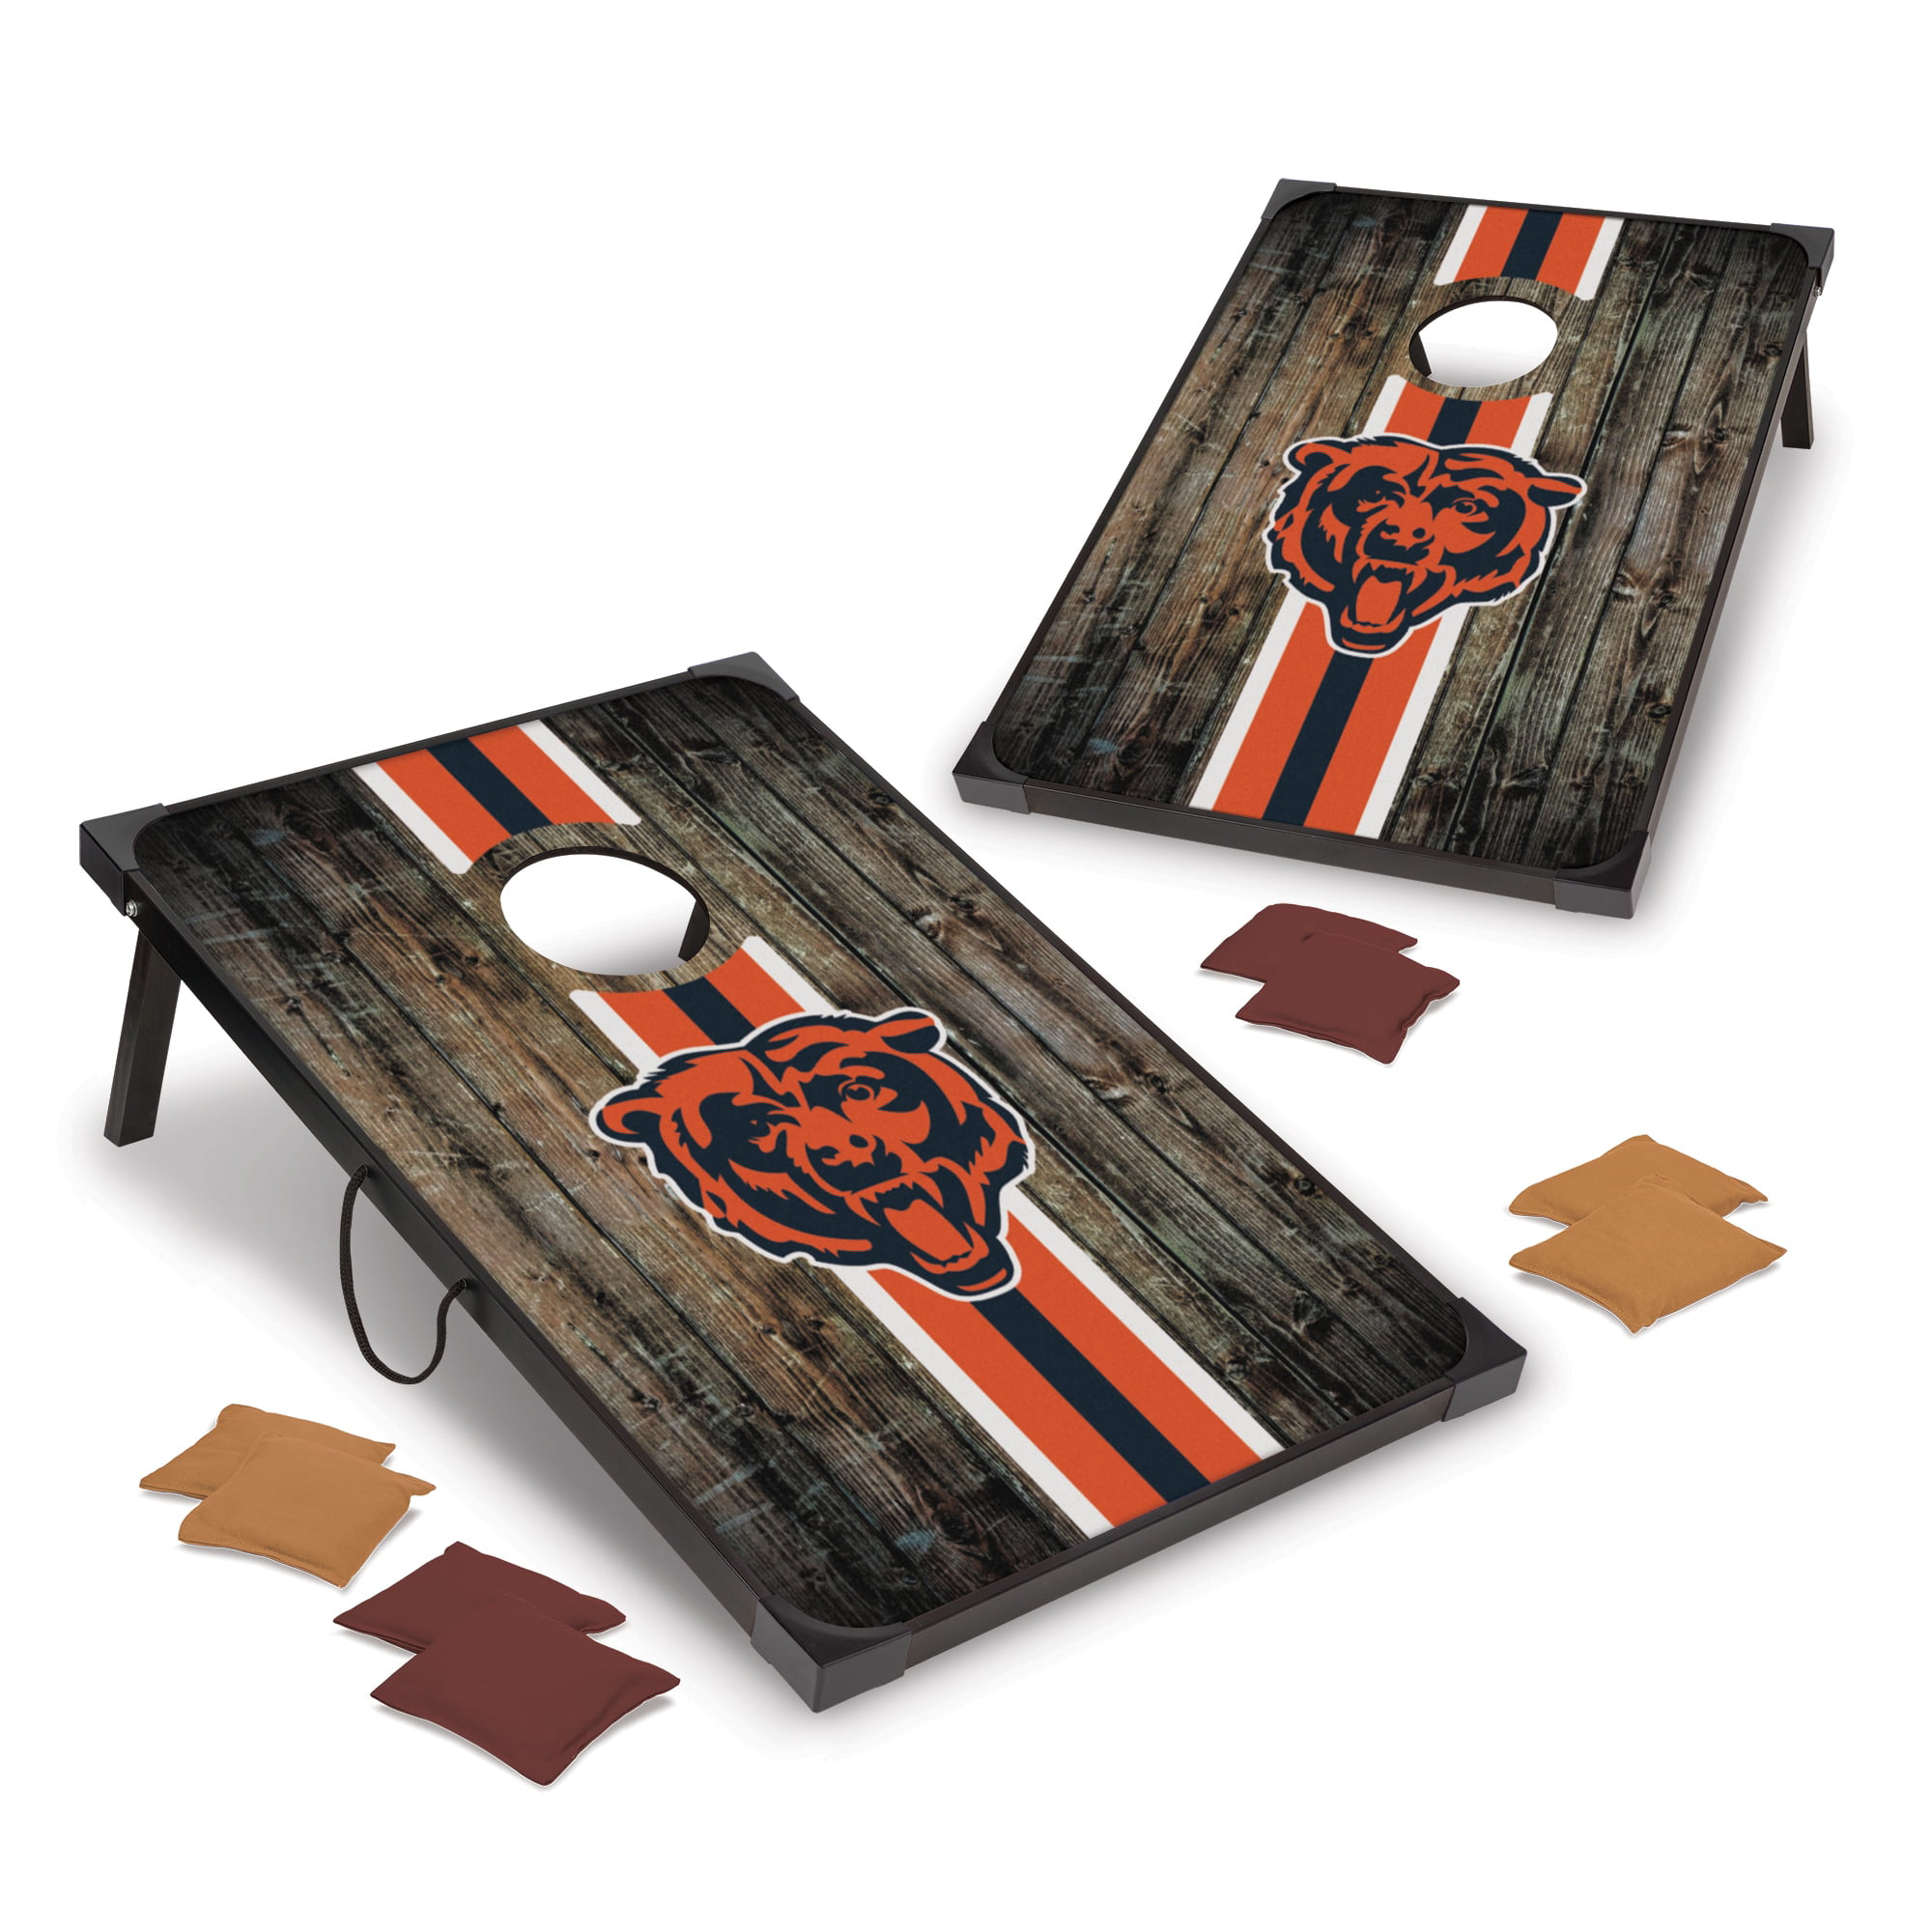 CHICAGO BEARS Cornhole Bean Bags All Weather Plastic Resin Filled WATERPROOF! 